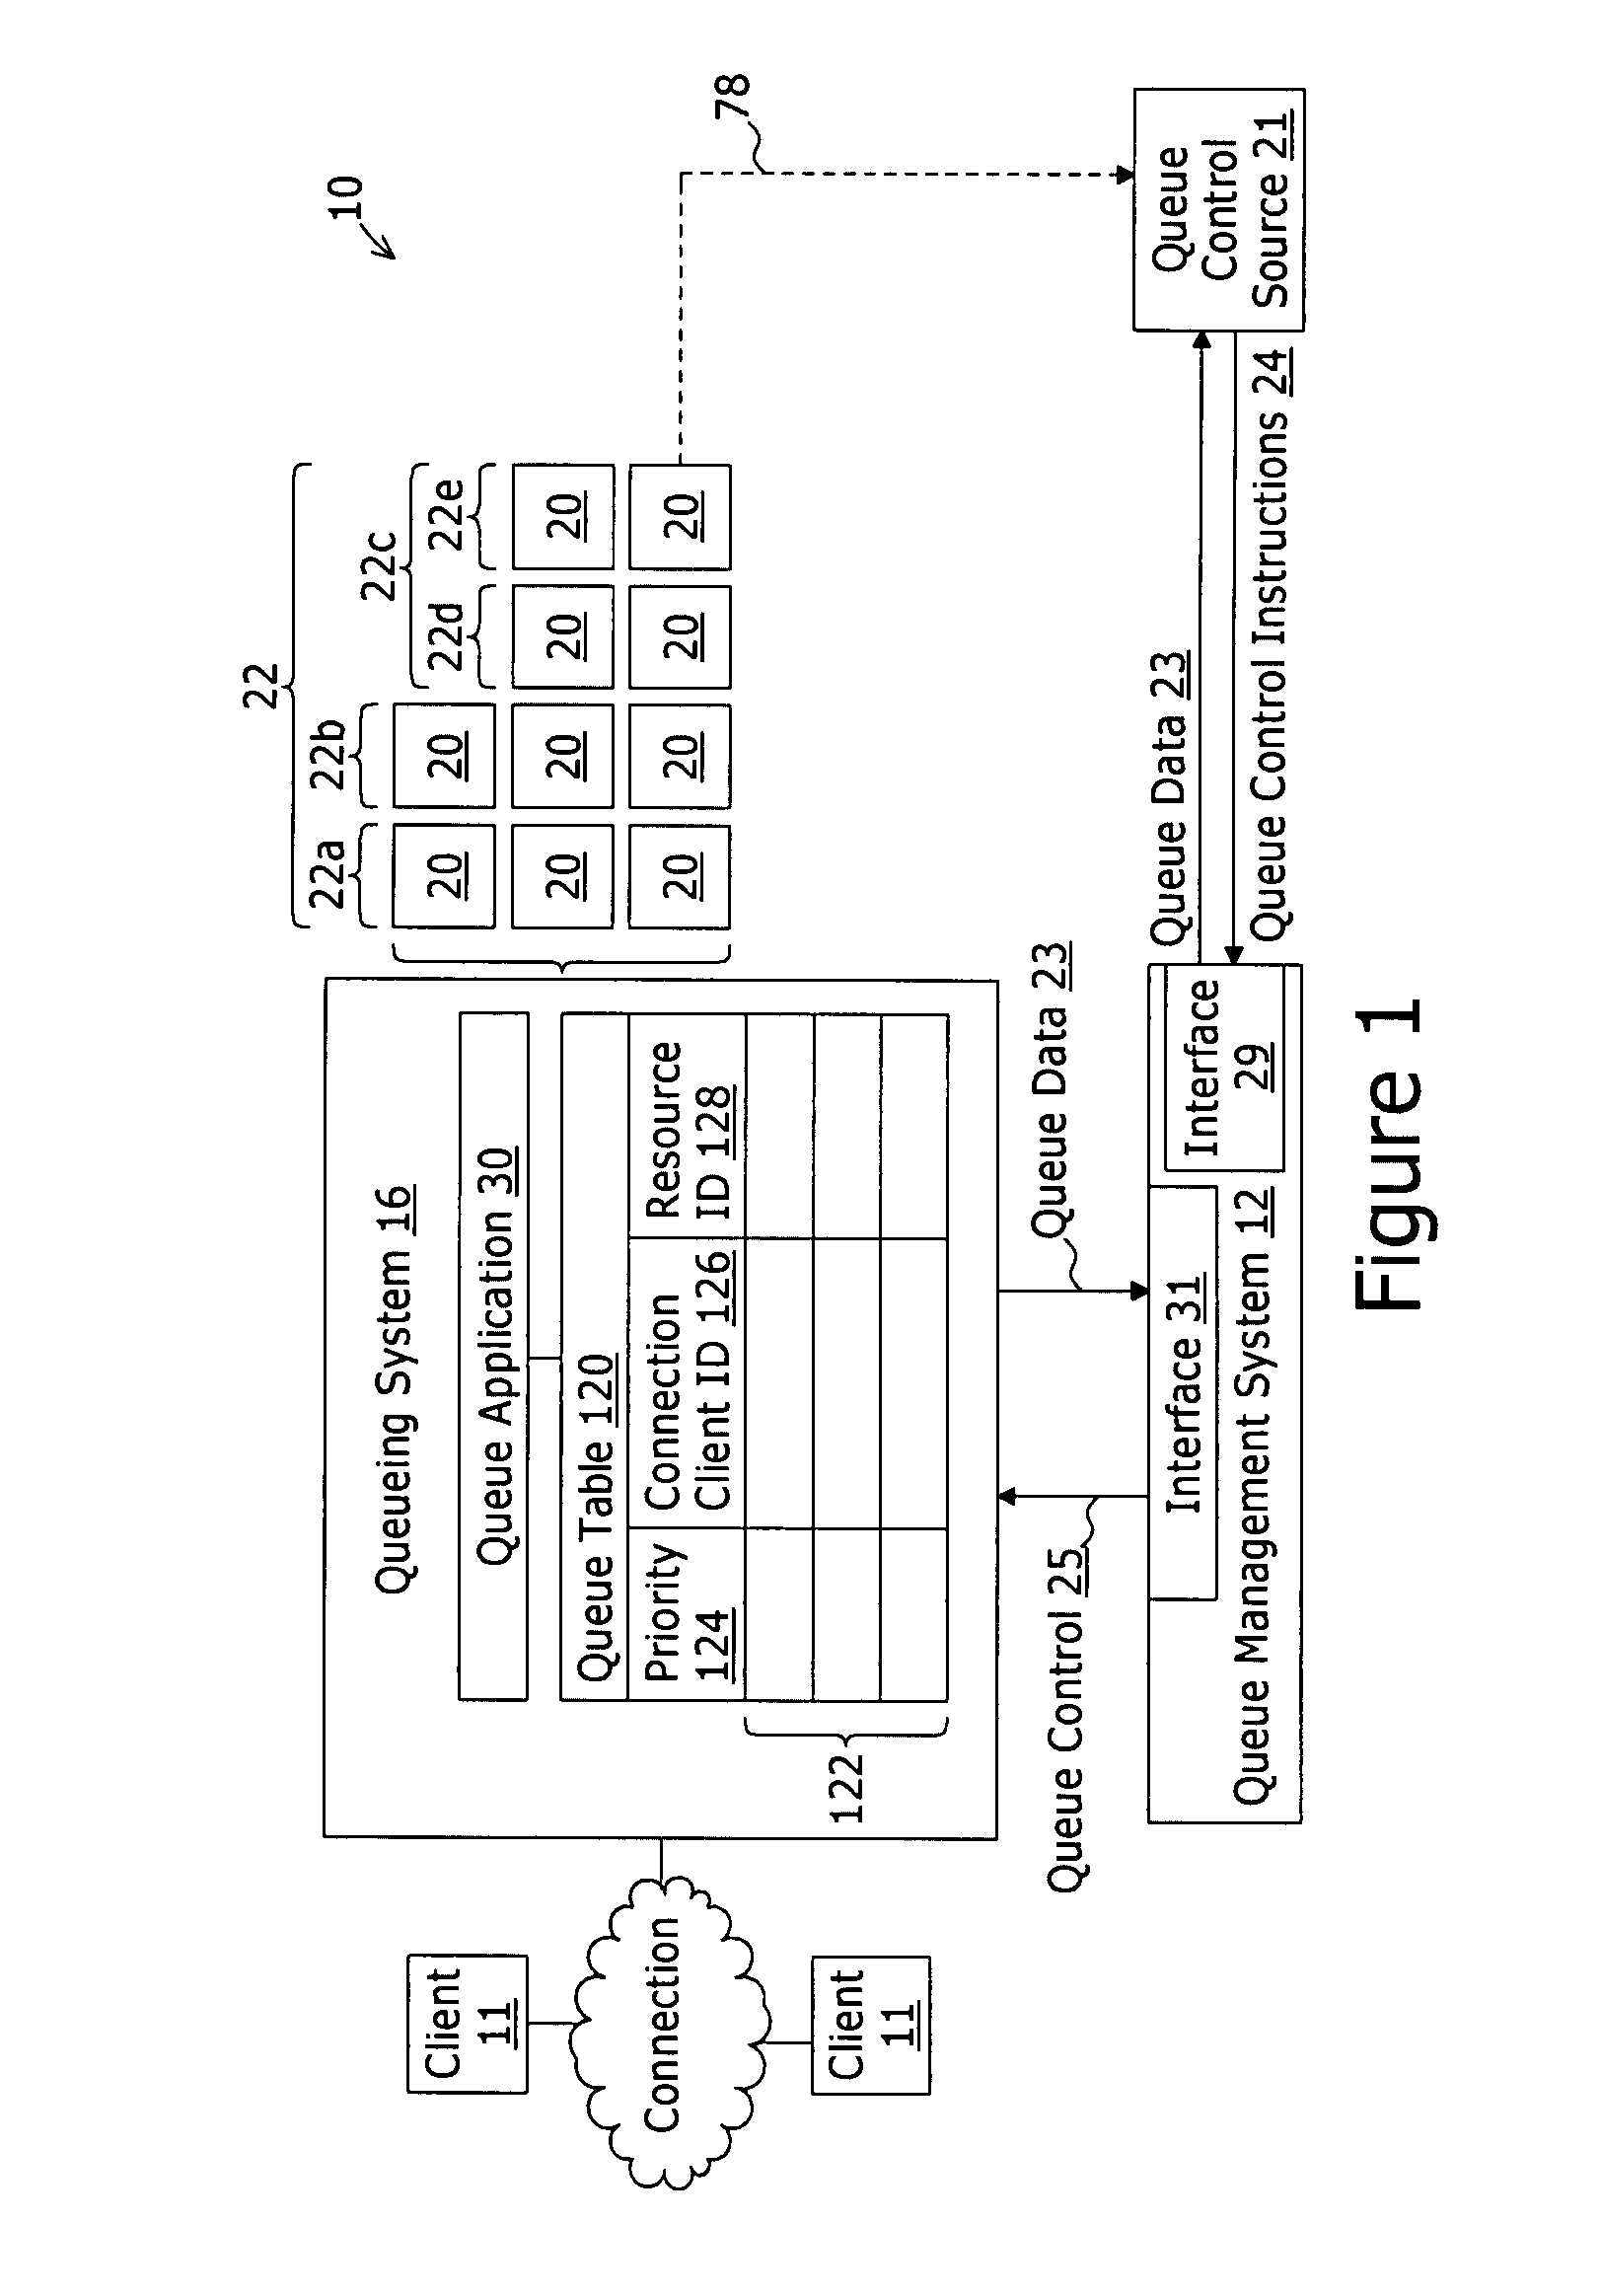 Accessory queue management system and method for interacting with a queuing system